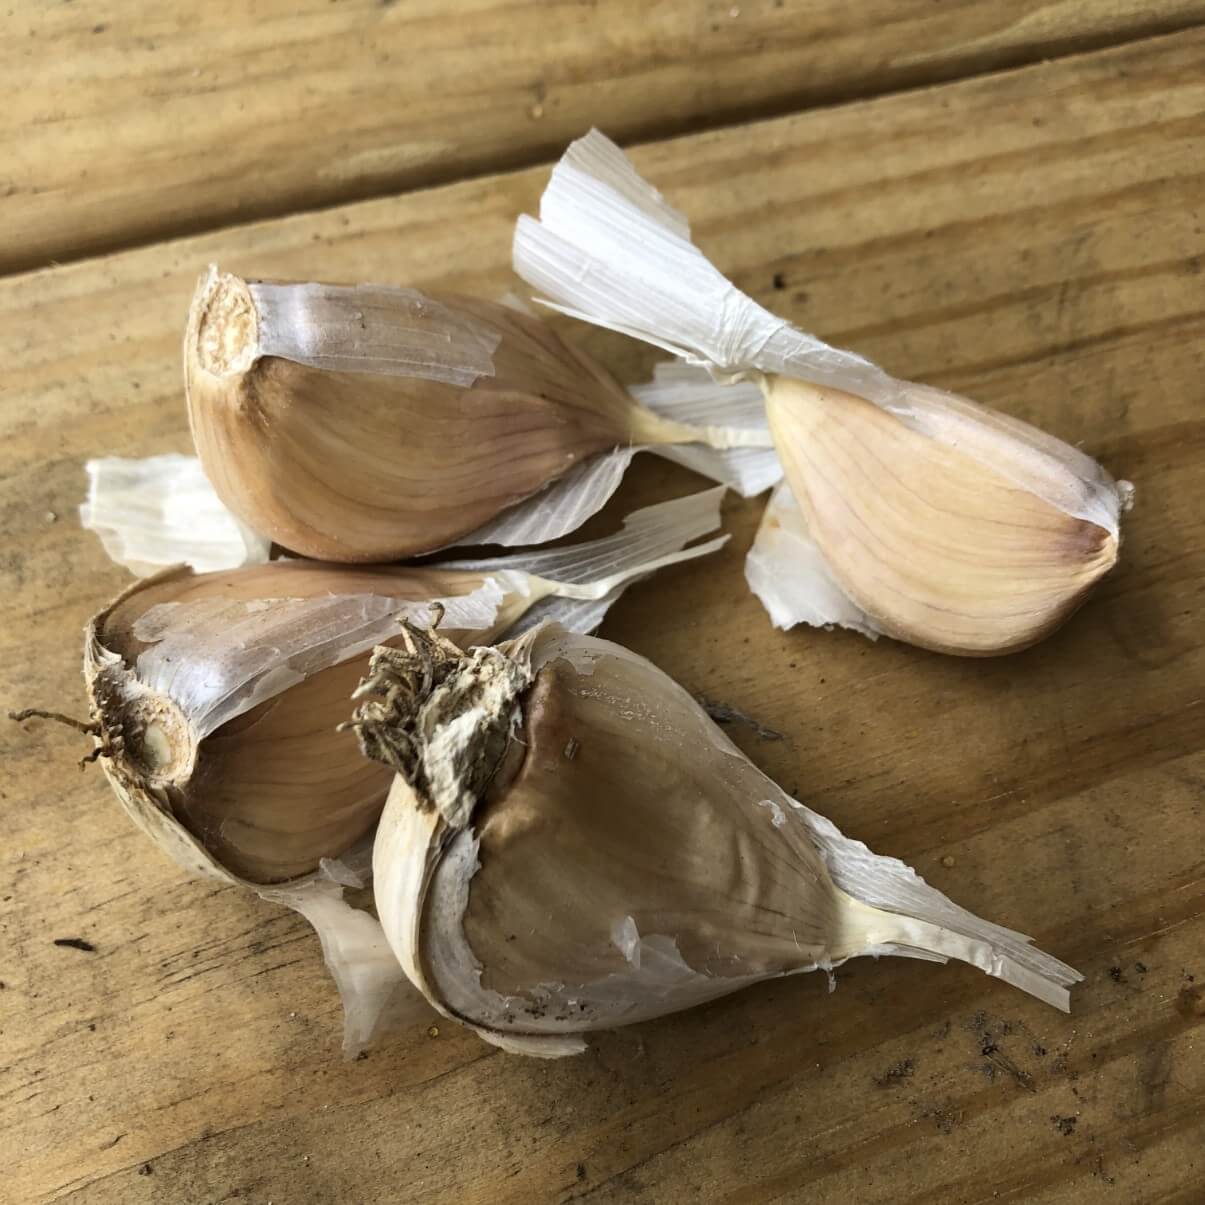 garlic cloves separated from the bulb and ready for planting